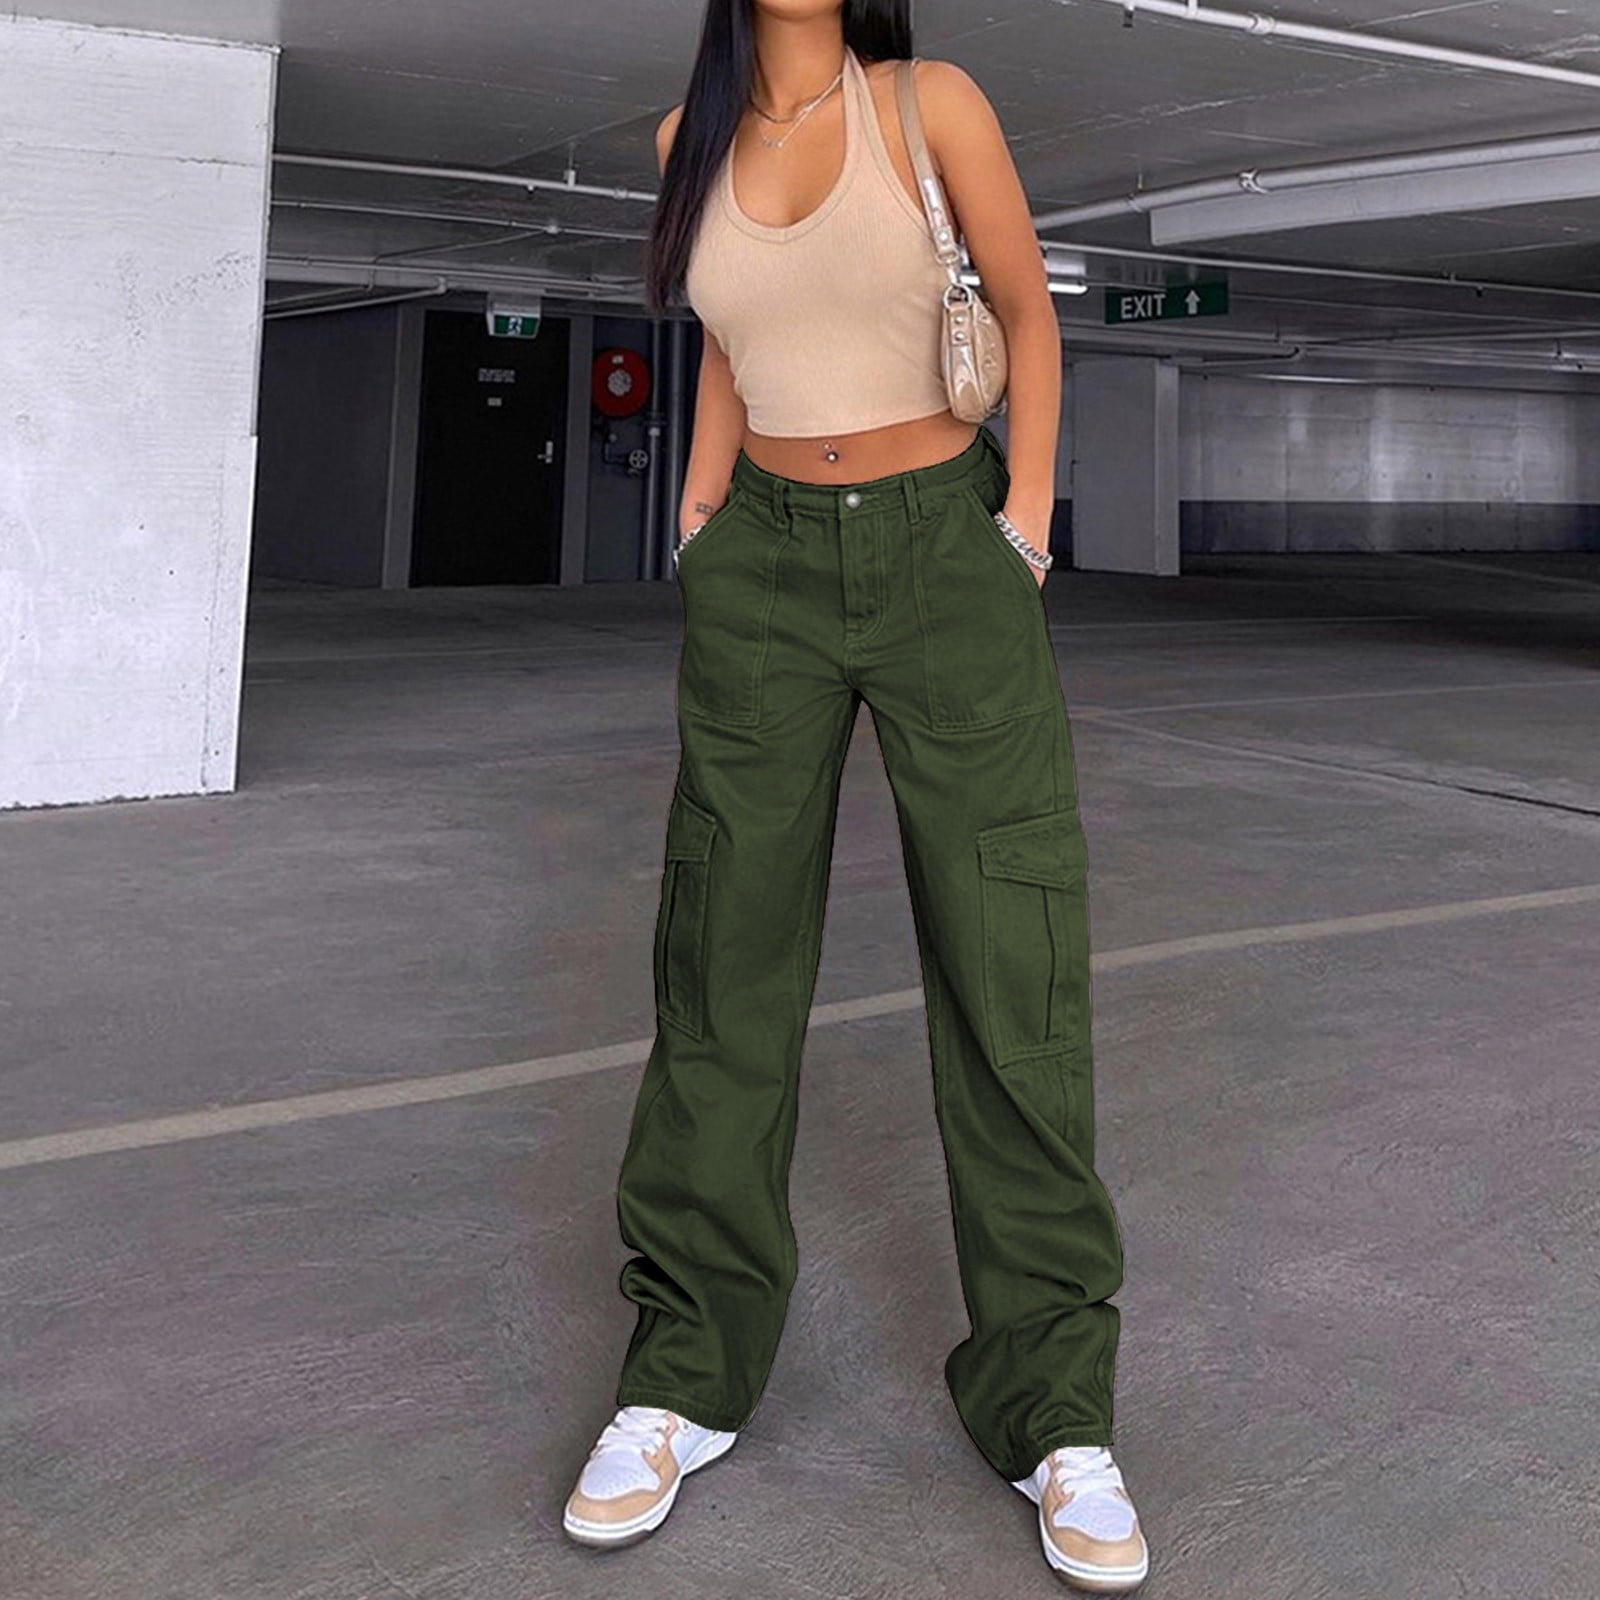 HIMIWAY Cargo Pants Women Palazzo Pants for Women Women's Fashion Casual  Solid Color Washed Denim Multi-Pocket Overalls Pants Army Green C XL 